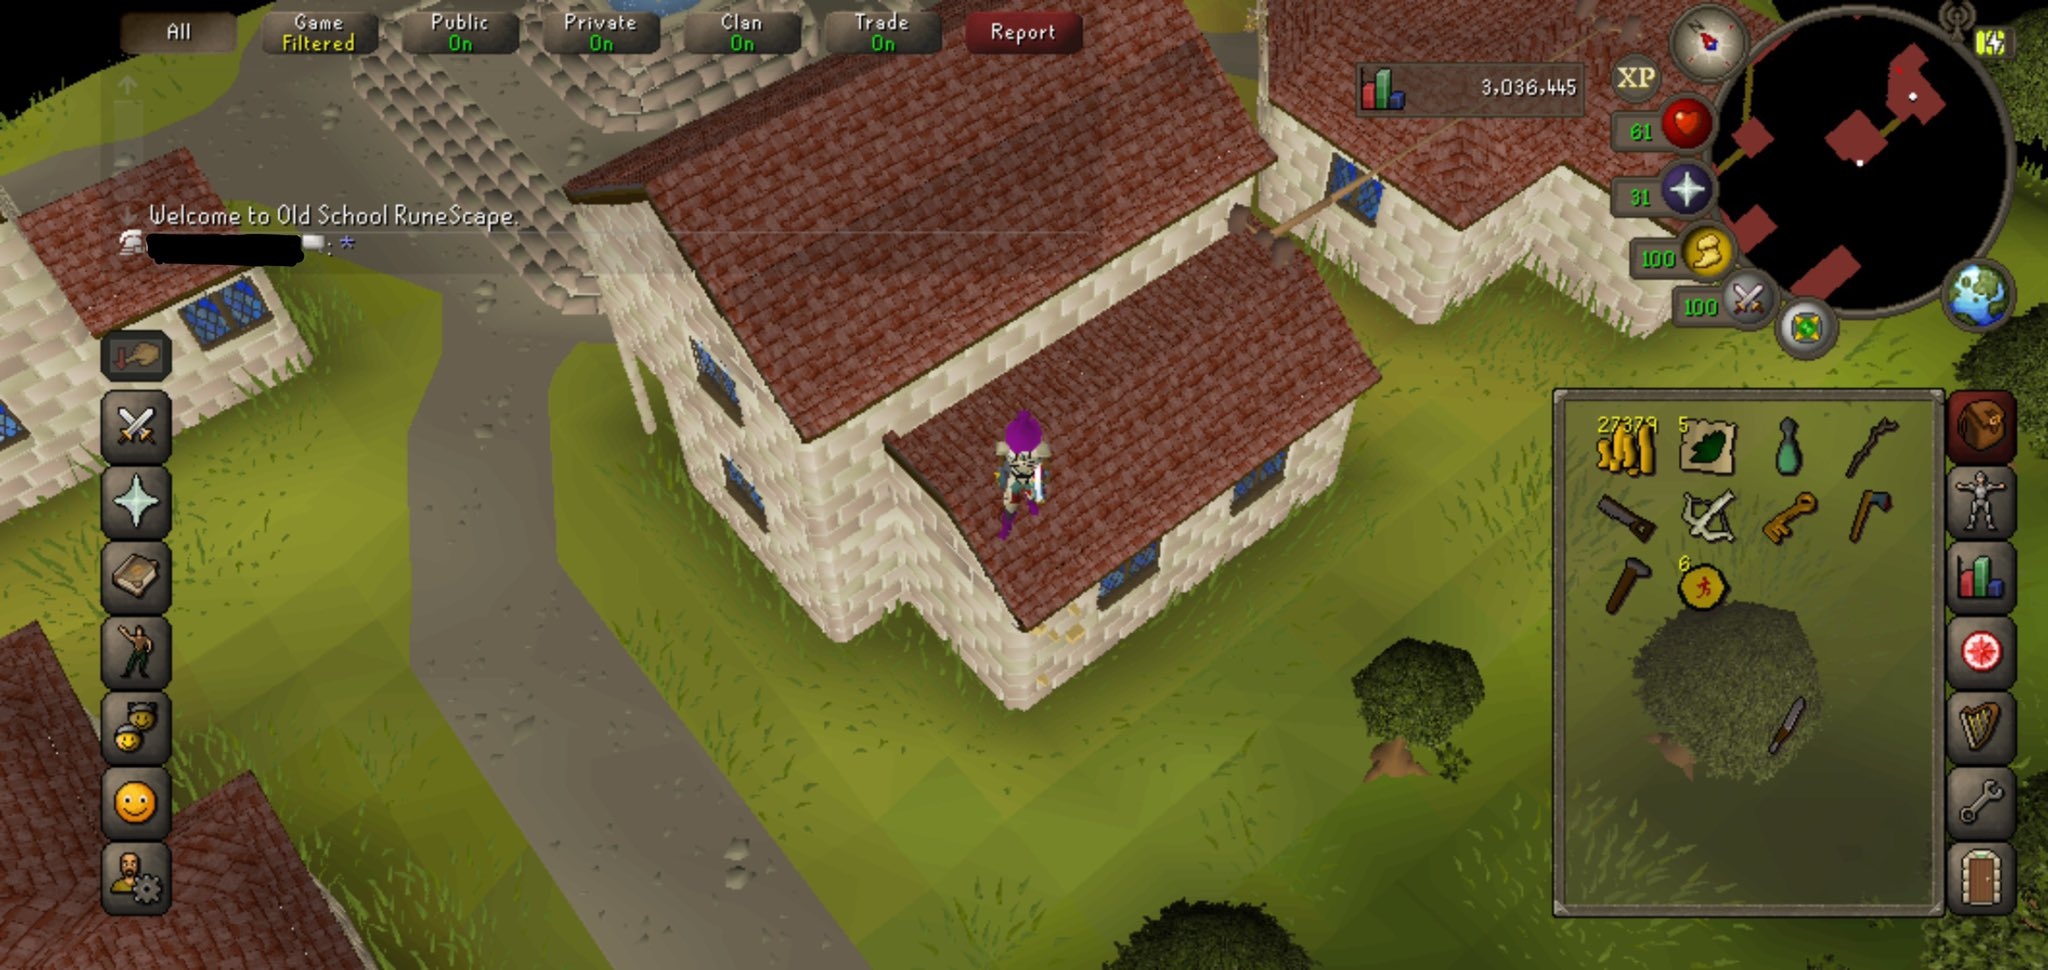 OpenOSRS - The Third-Party Client For Old School RuneScape